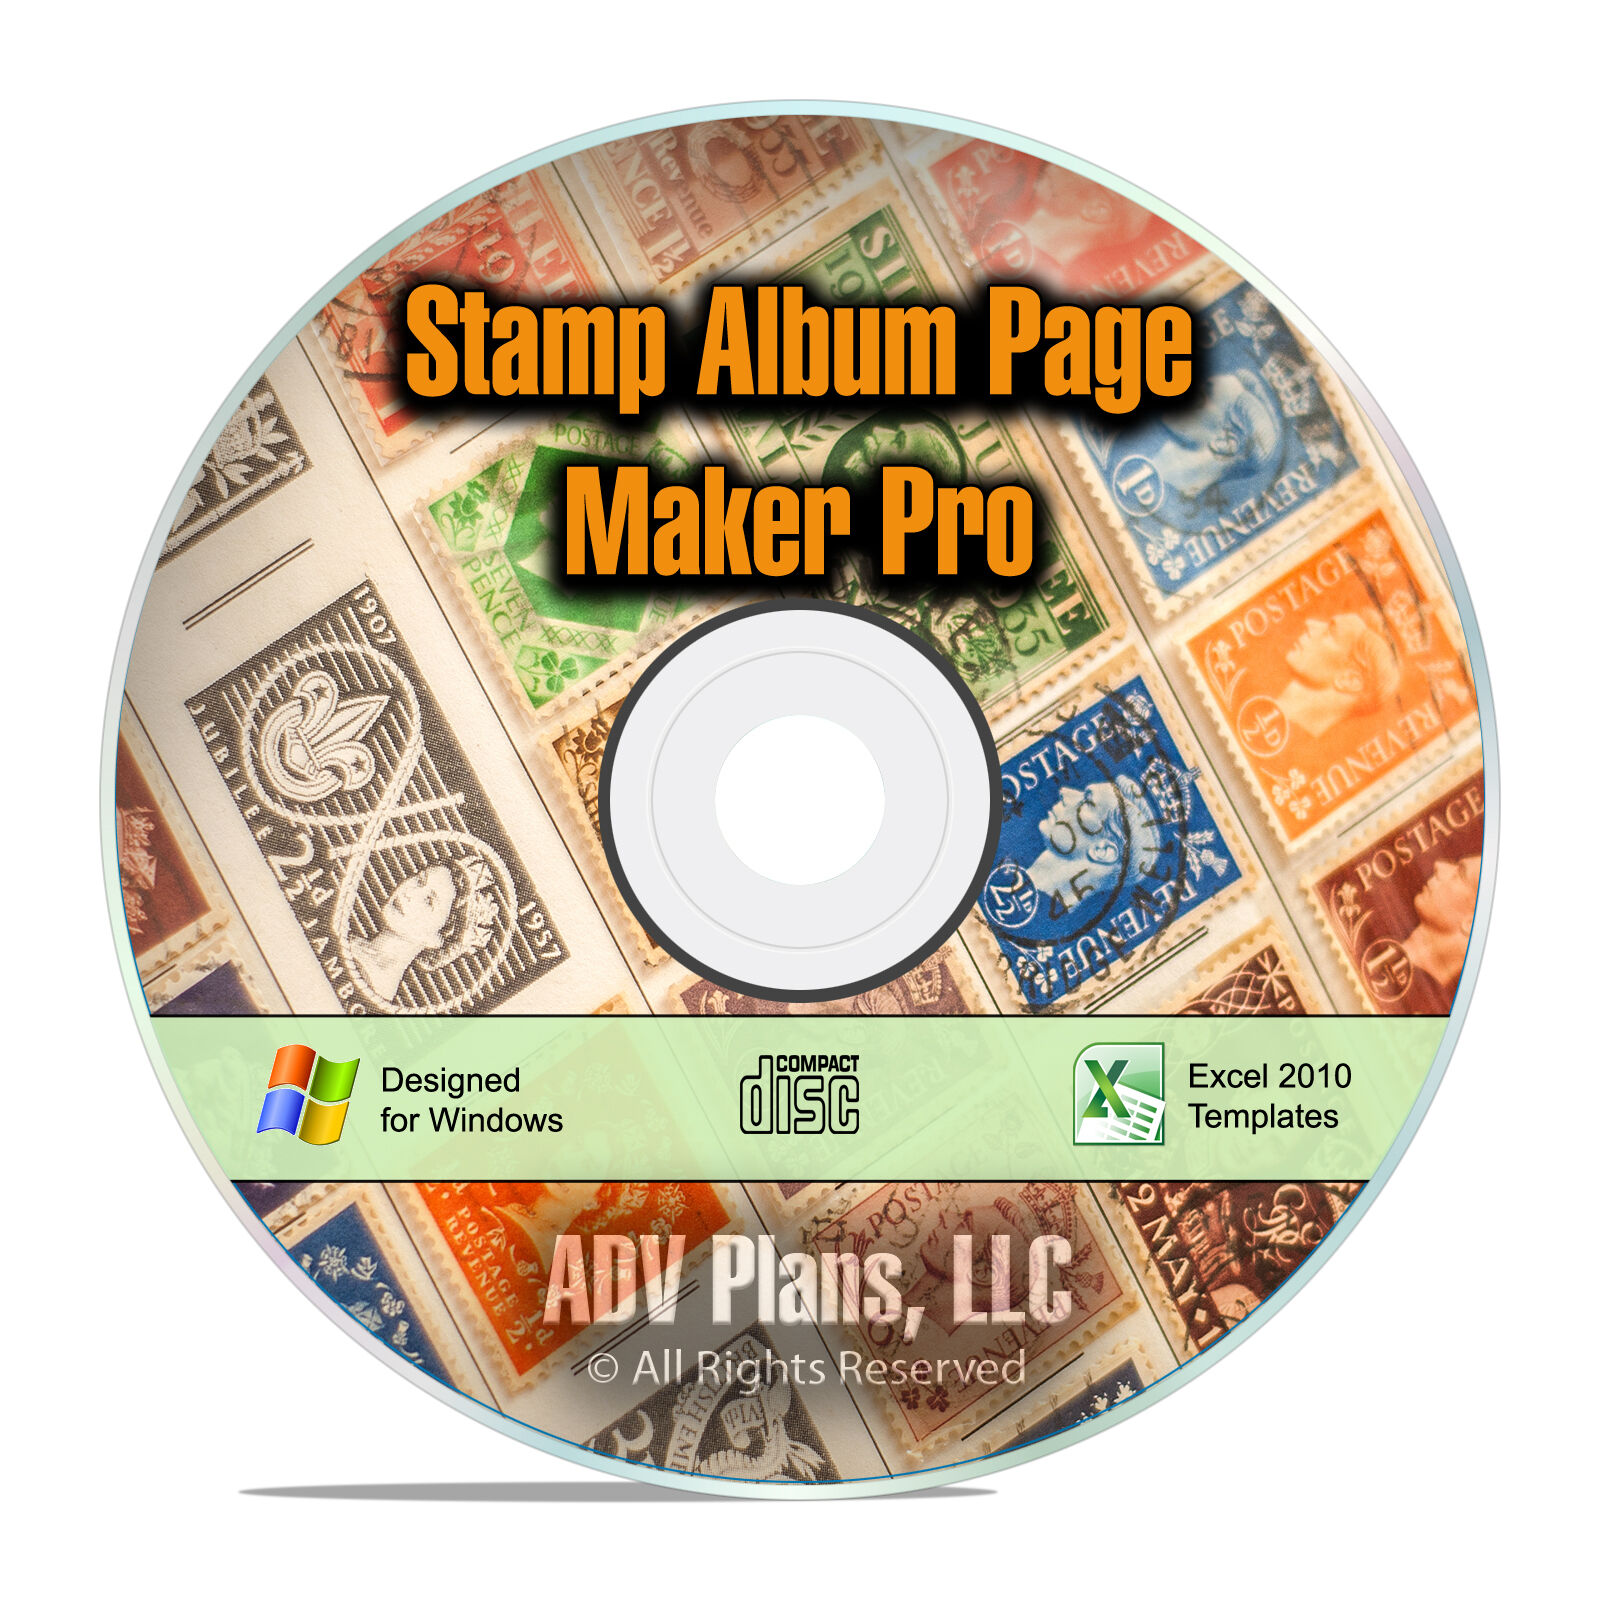 Stamp Album Page Maker Pro, Make Your Own Custom Printable Stamp Pages CD F13 ADV Plans, LLC ADV-F13